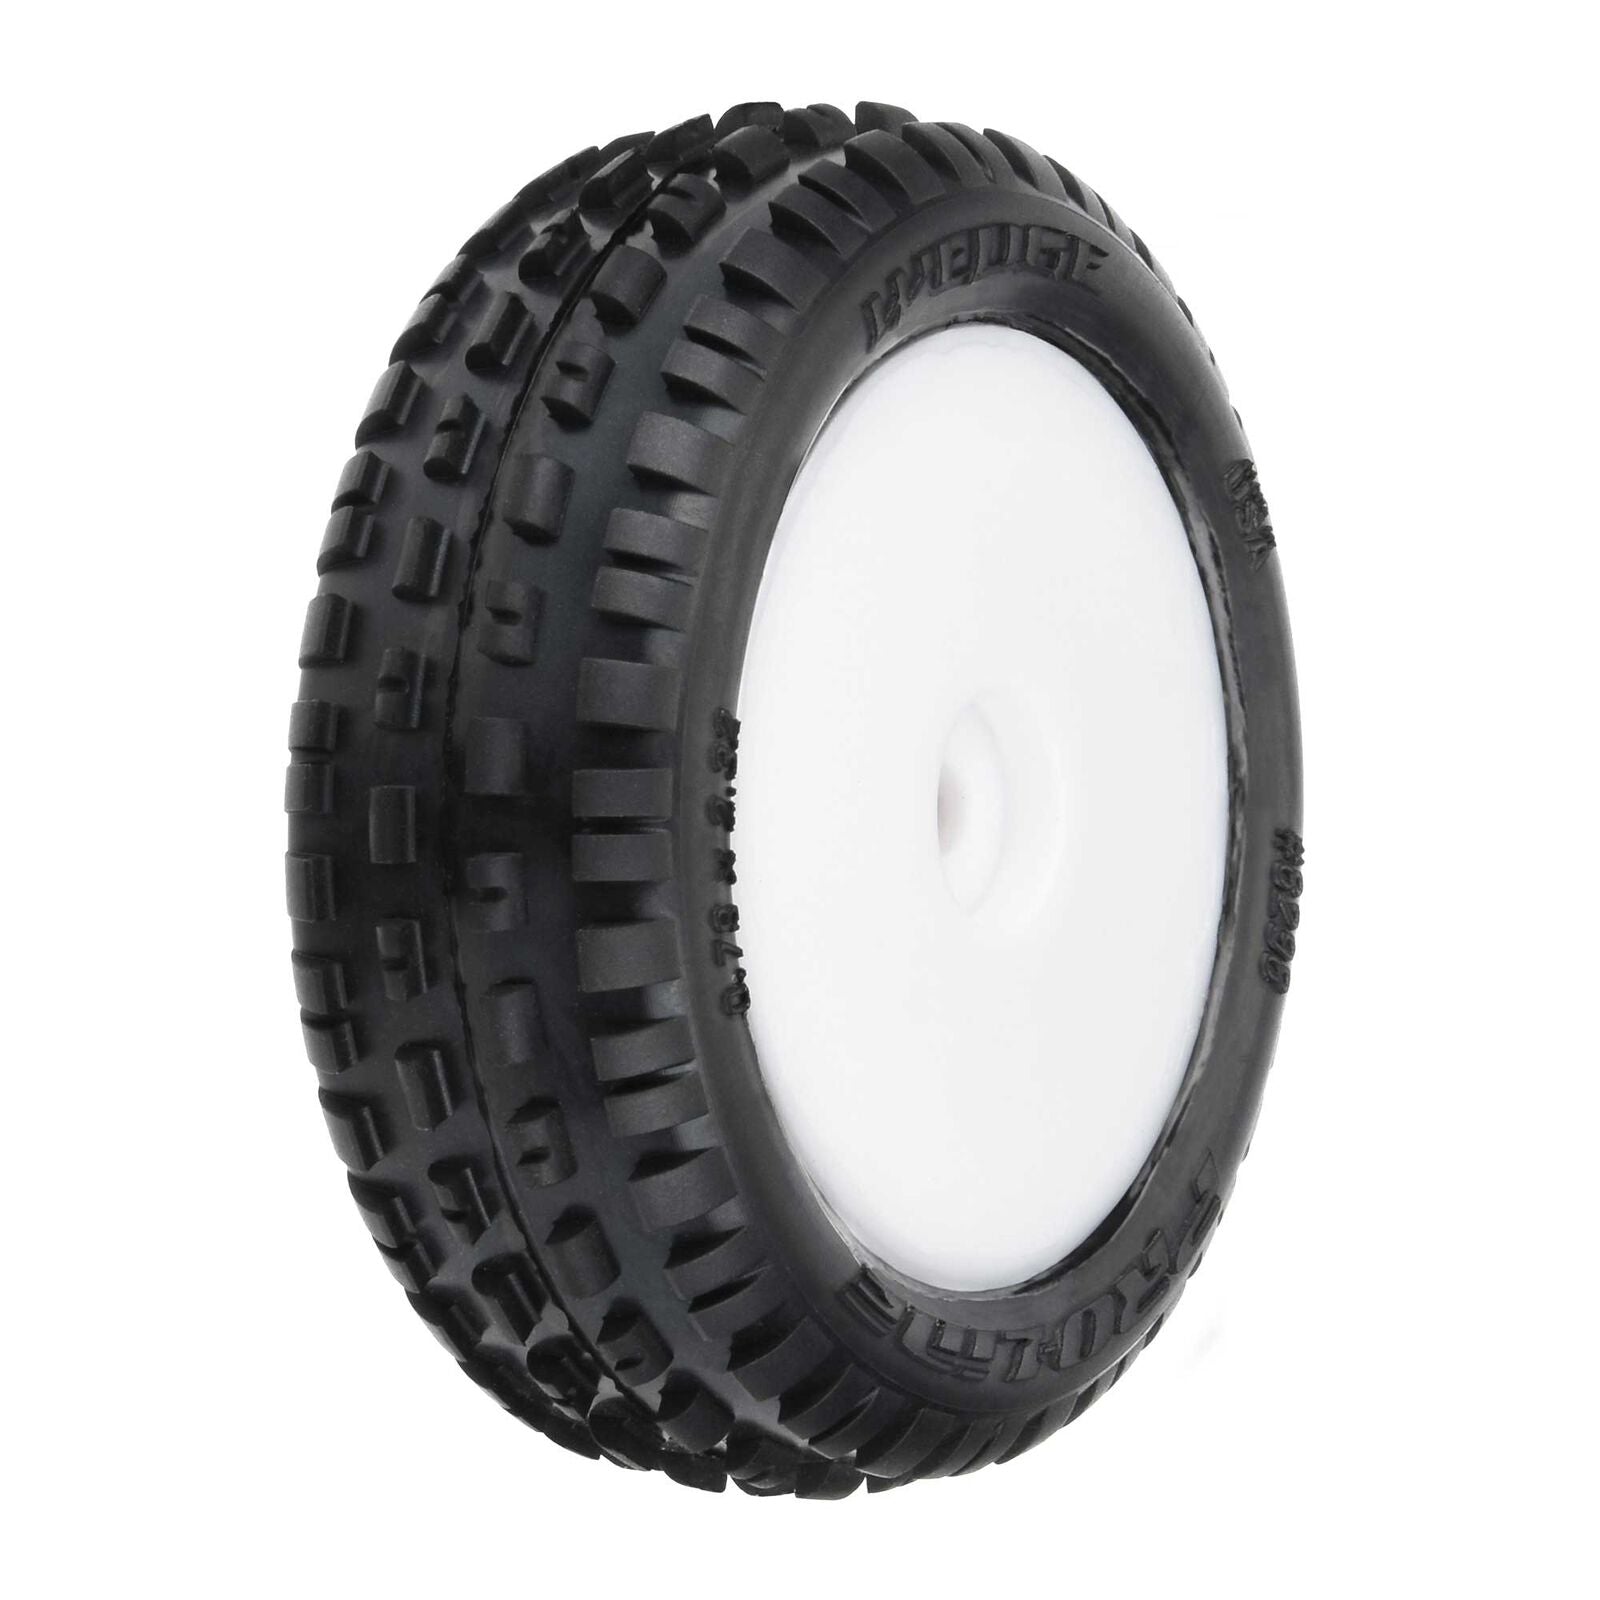 PROLINE 8298-13 1/16 Wedge Front Mini Pre-Mounted Tires 8mm (2) White